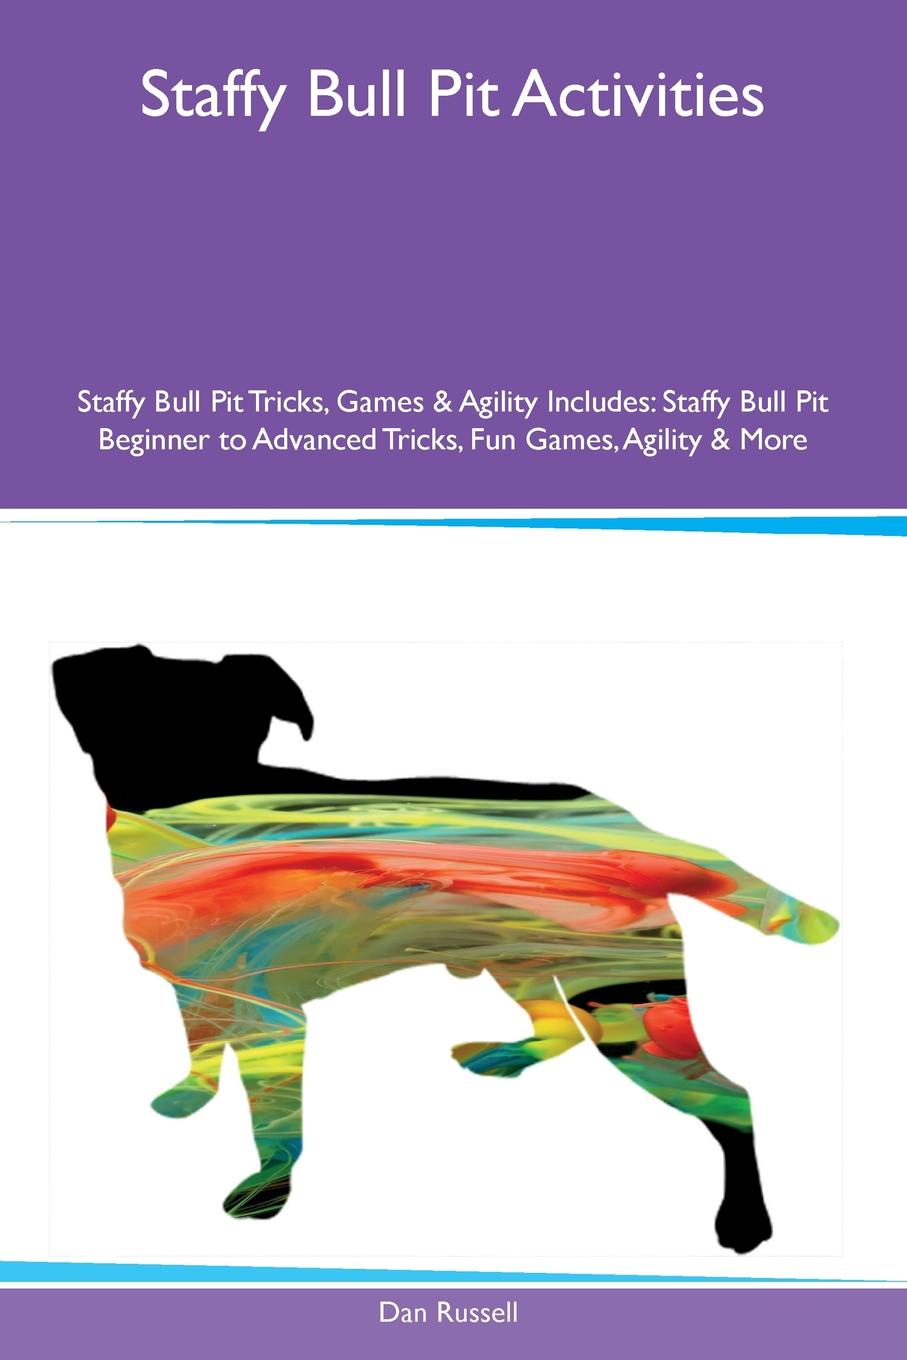 Staffy Bull Pit Activities Staffy Bull Pit Tricks, Games & Agility Includes. Staffy Bull Pit Beginner to Advanced Tricks, Fun Games, Agility & More